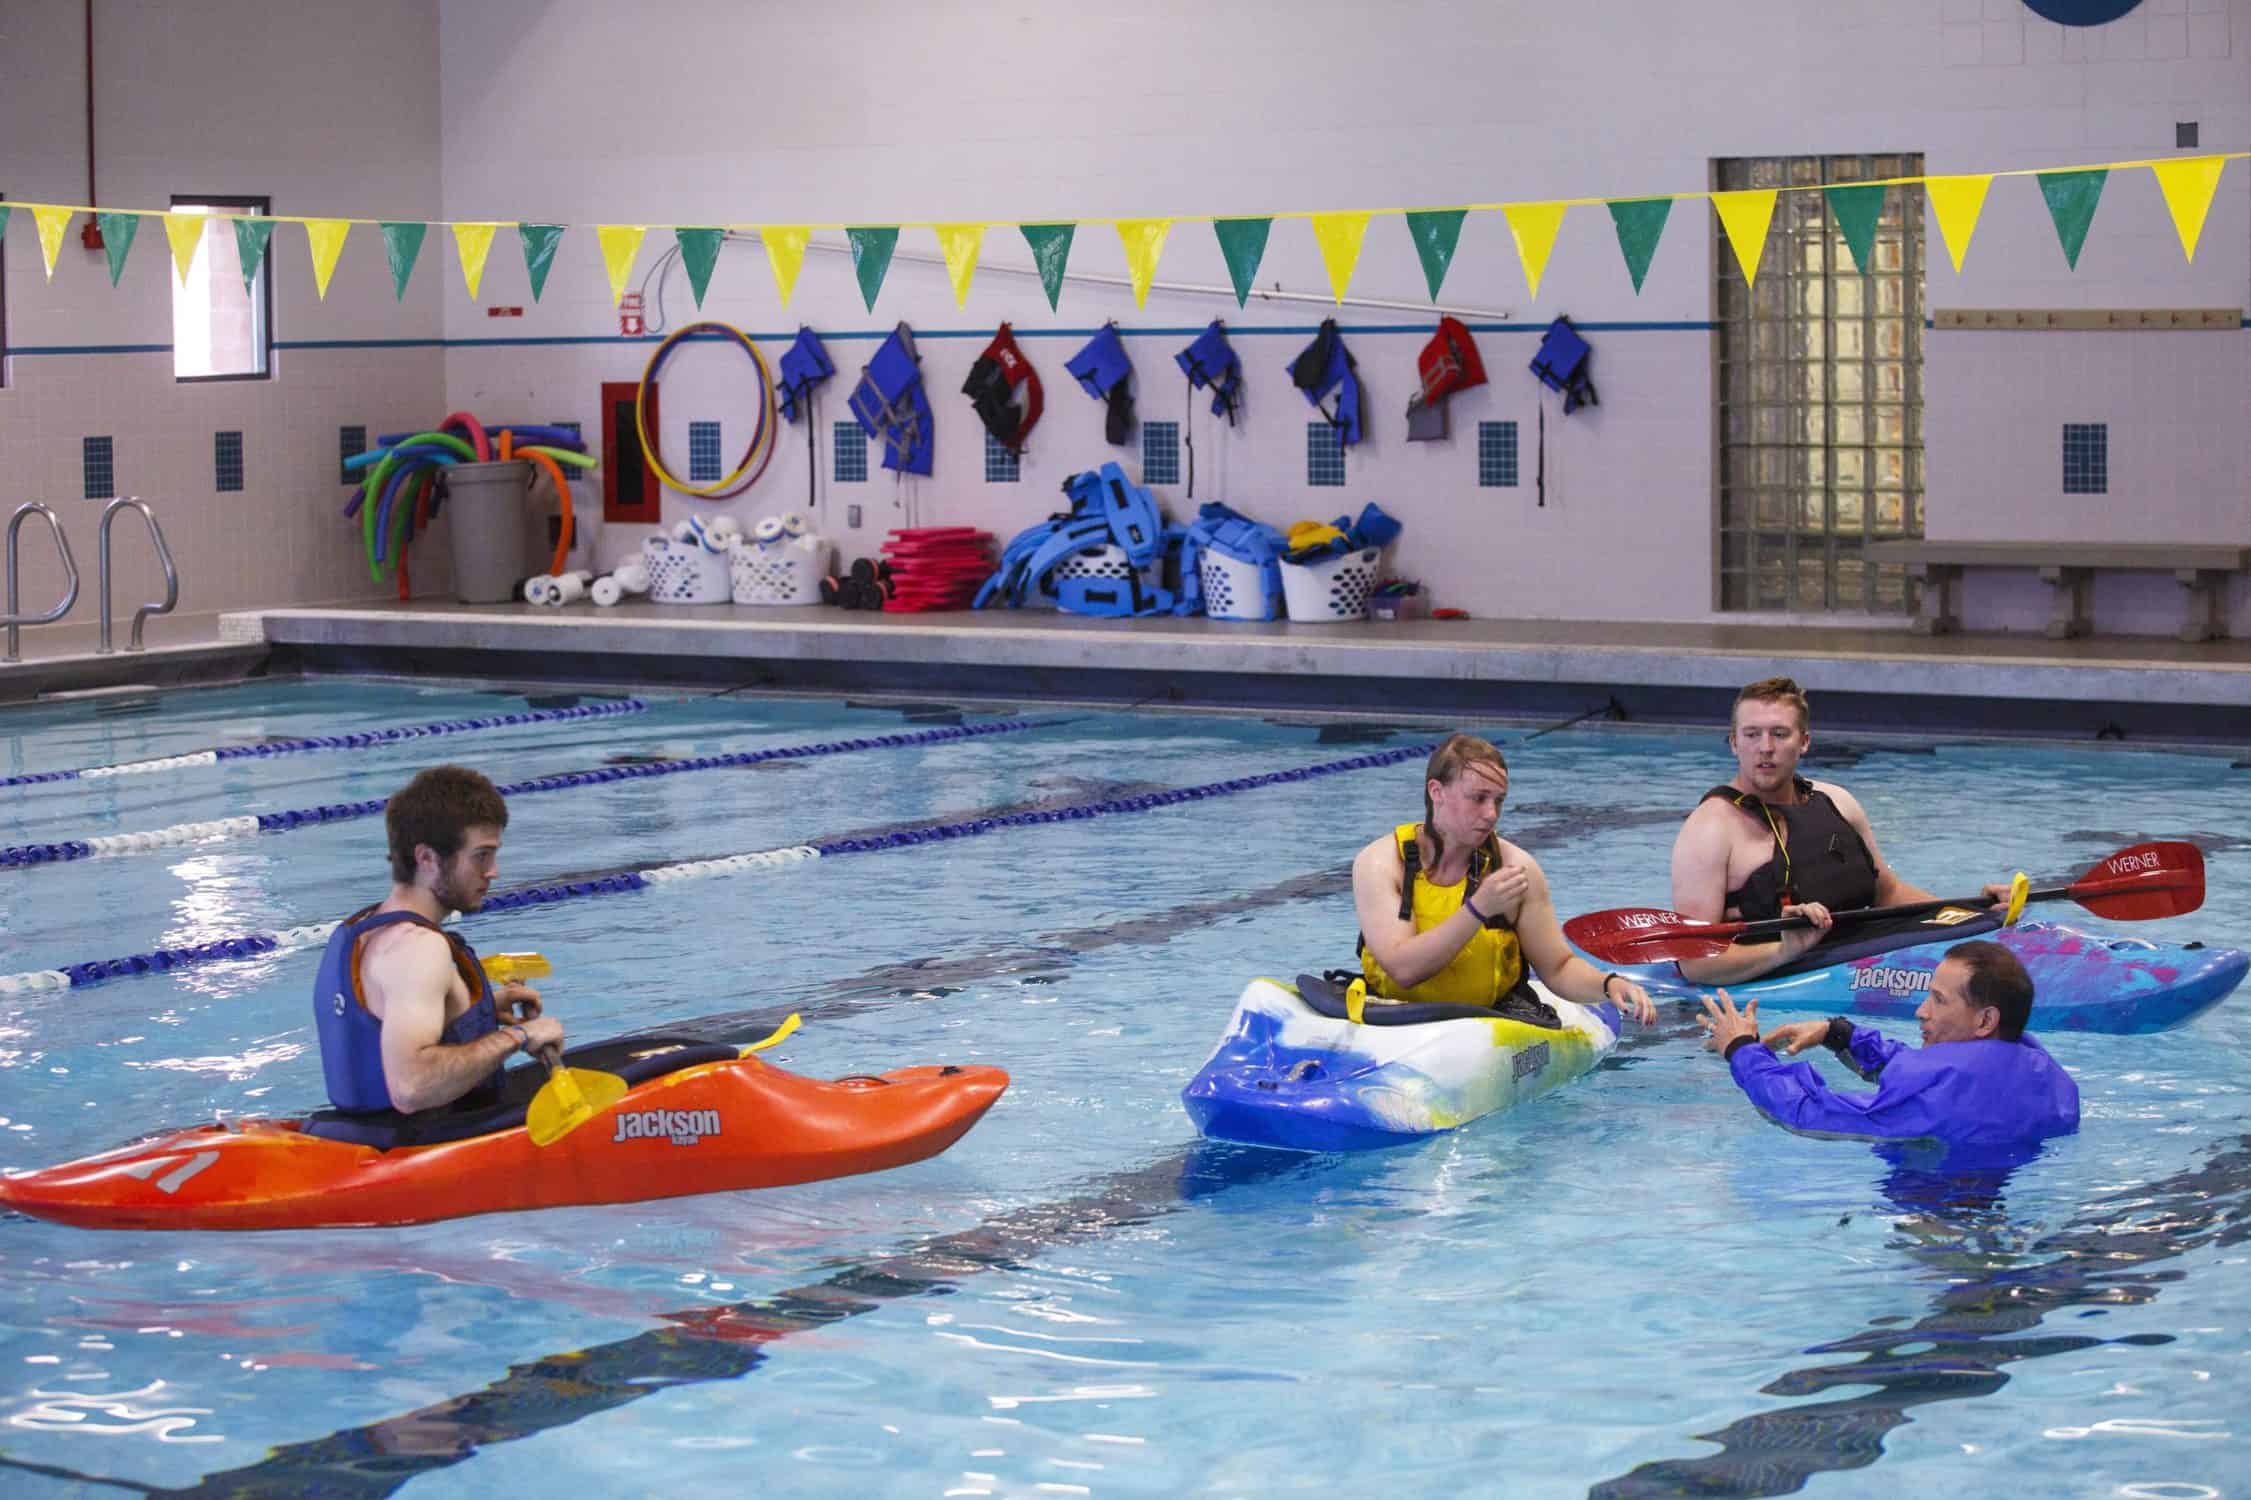 Students use kayaks in the pool on campus with their professor